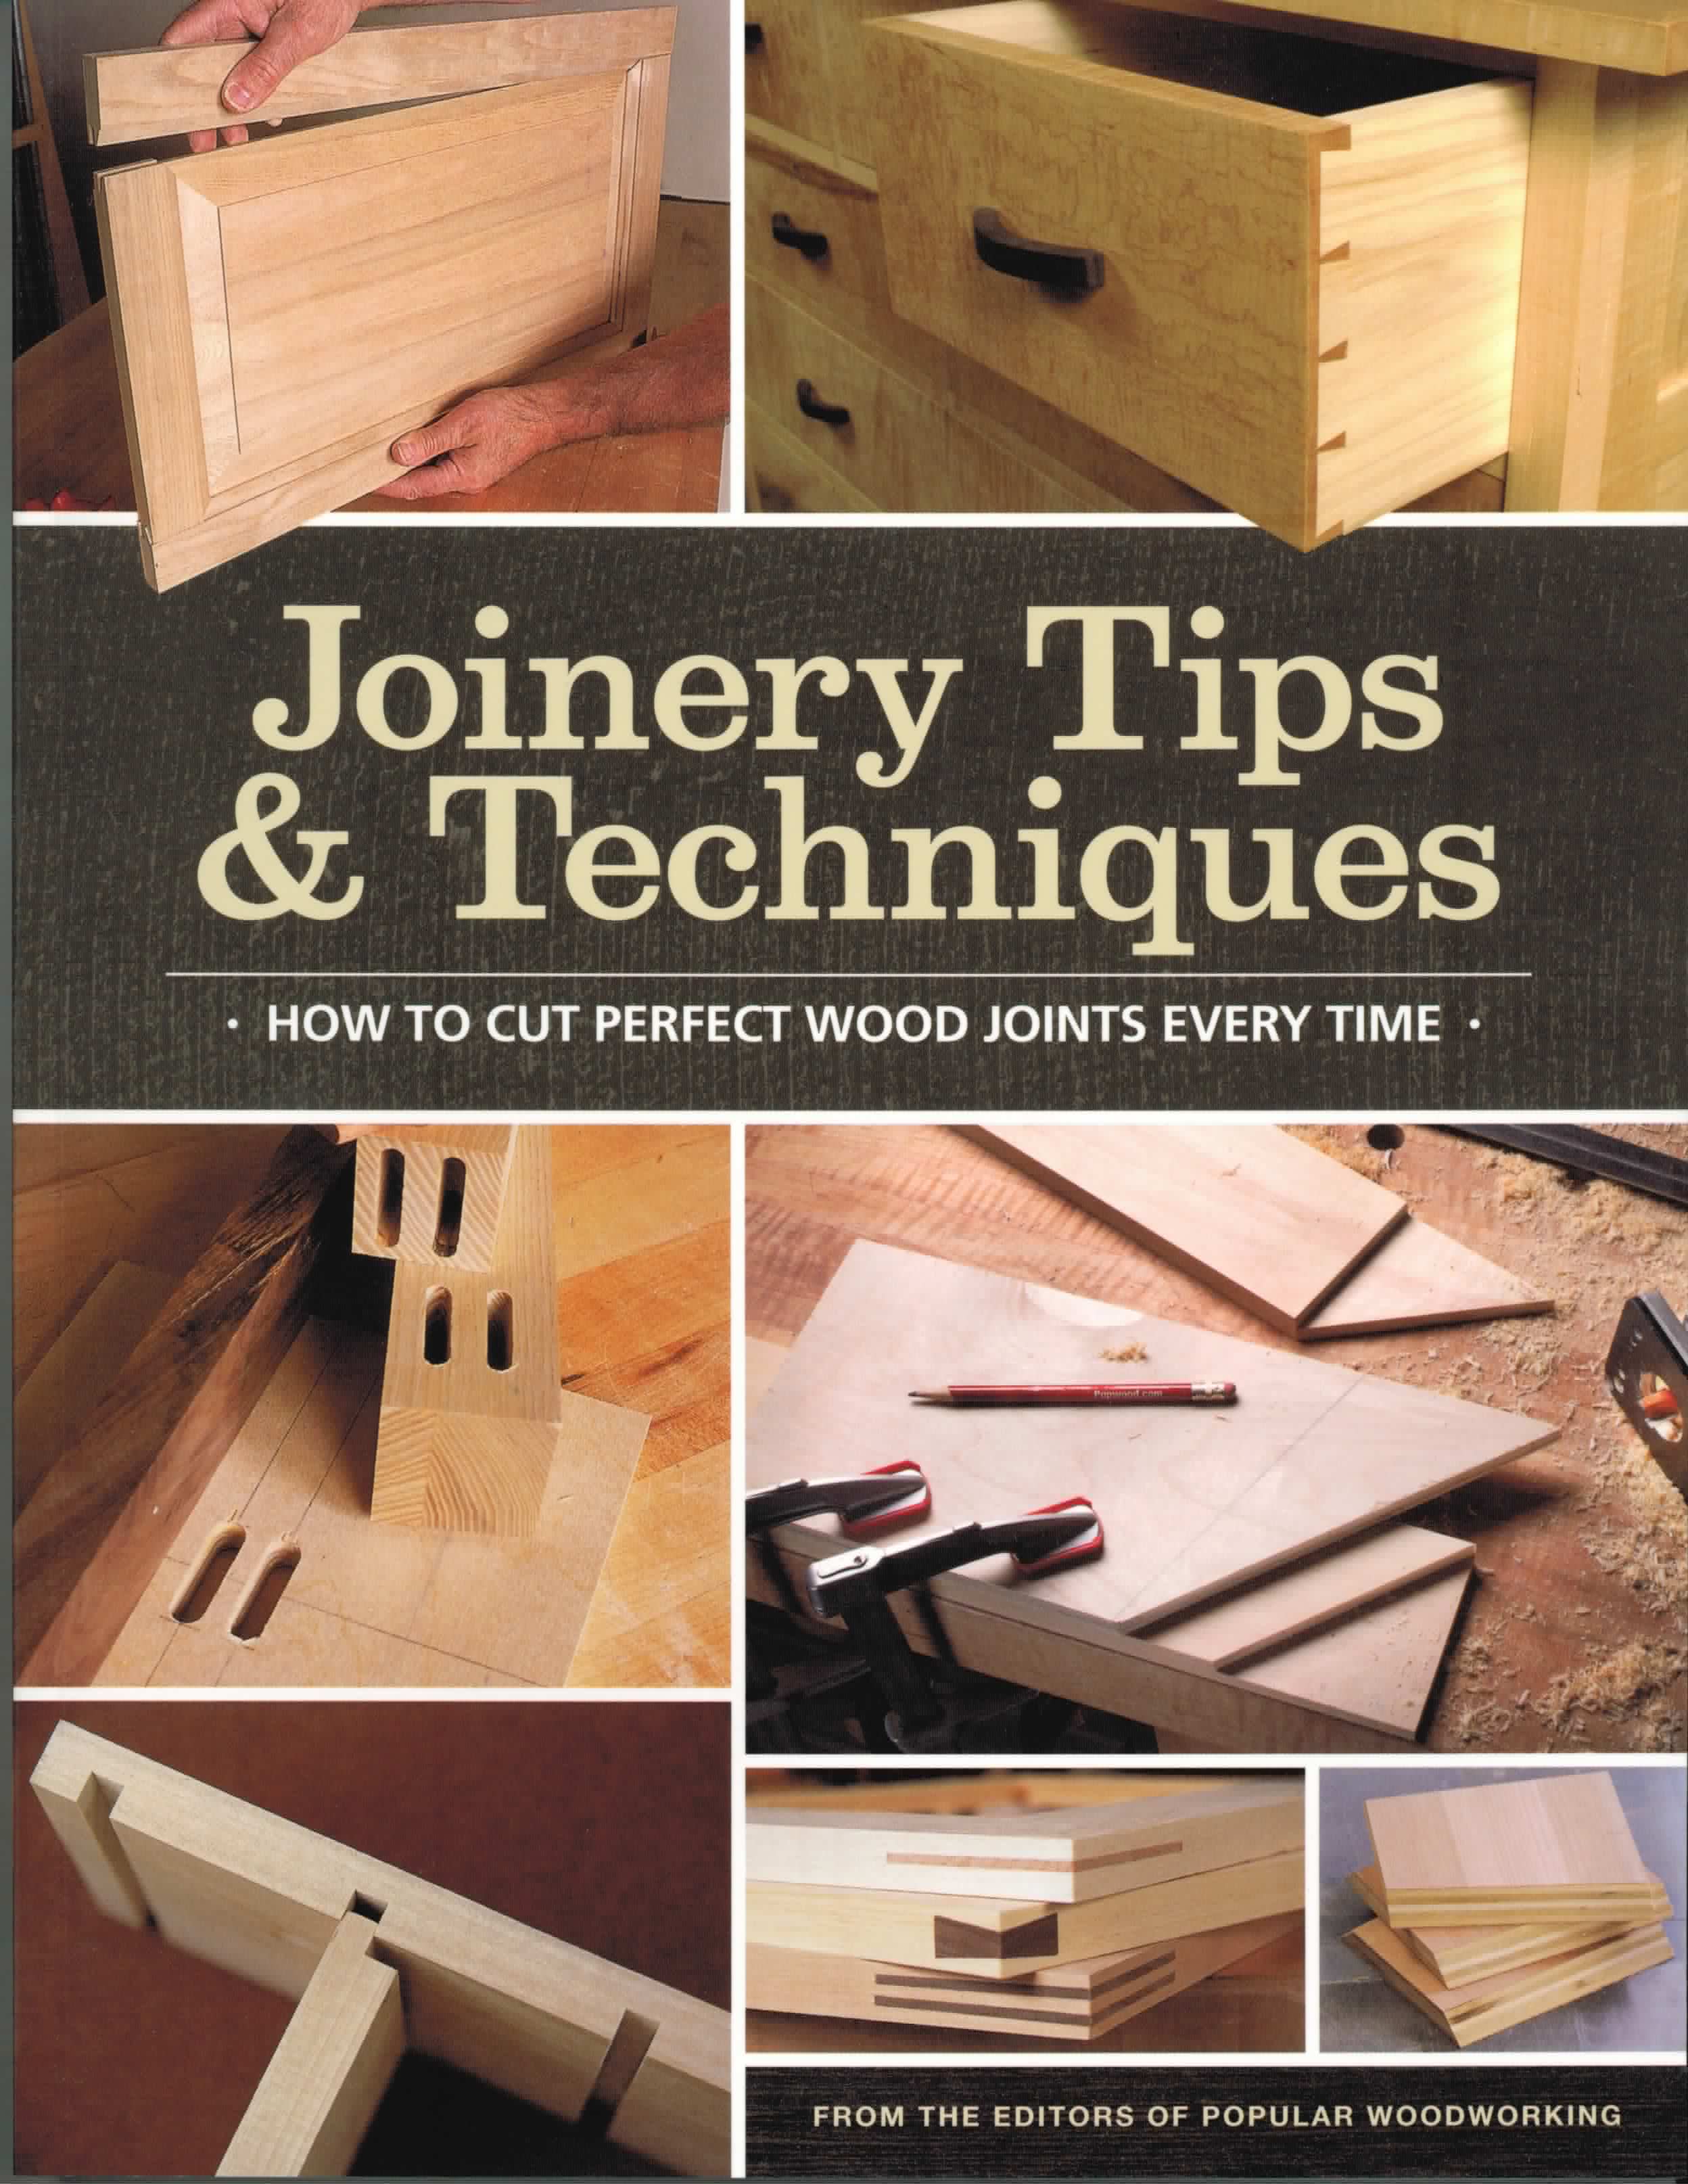 Home woodworking books